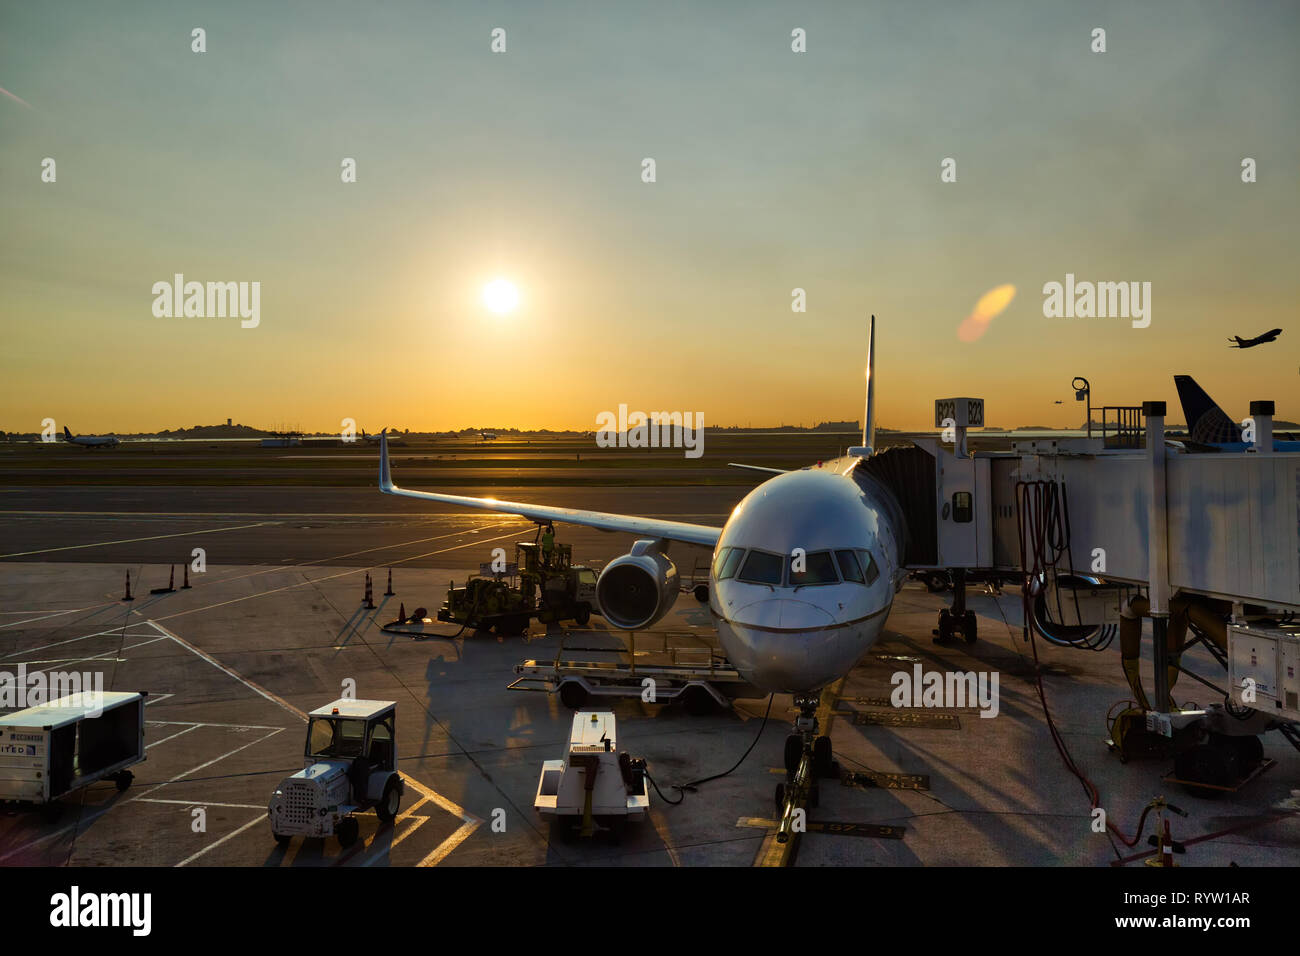 Boston, USA-March 13, 2018: Grounded Boing planes in the aftermath of a deadly prior crashes of Boing 737 and 738 max planes Stock Photo